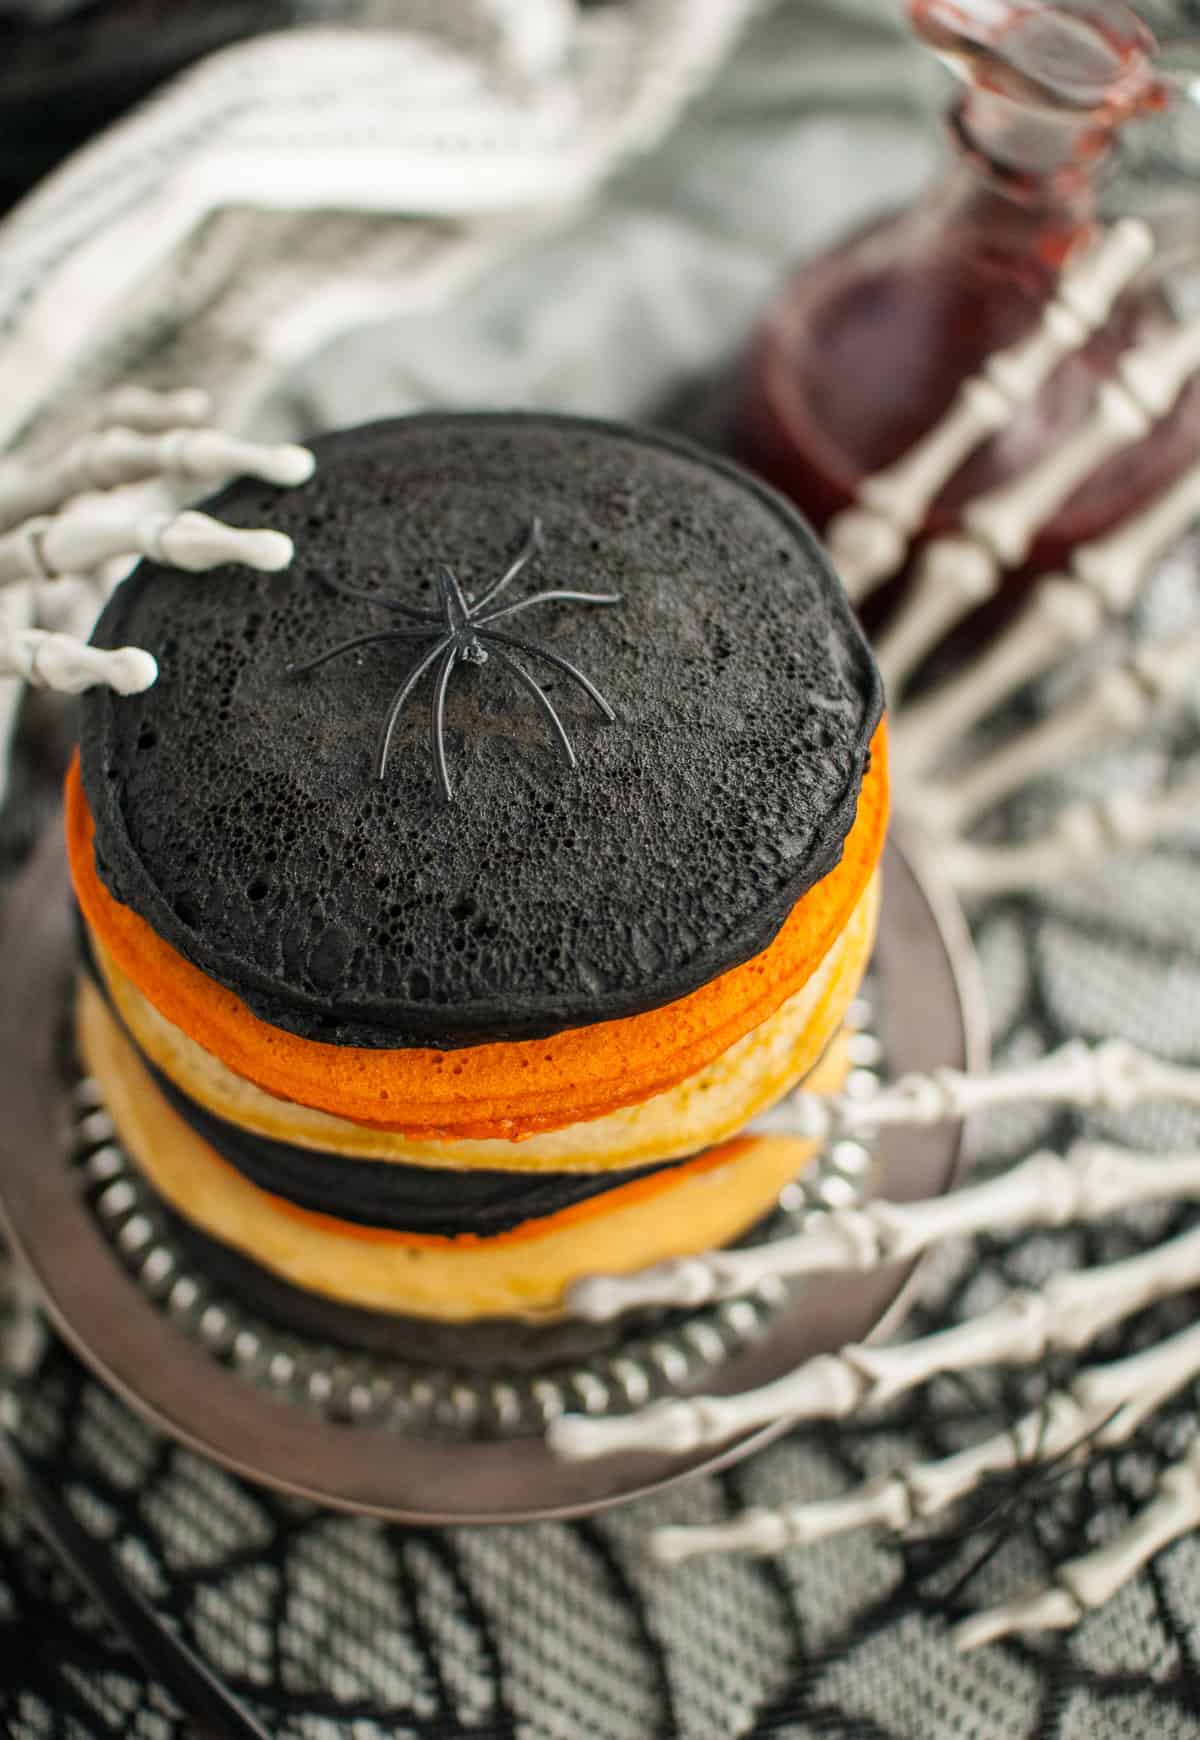 A plastic spider sitting on top of a stack of pancakes dyed with food dye and activated charcoal powder for Halloween.